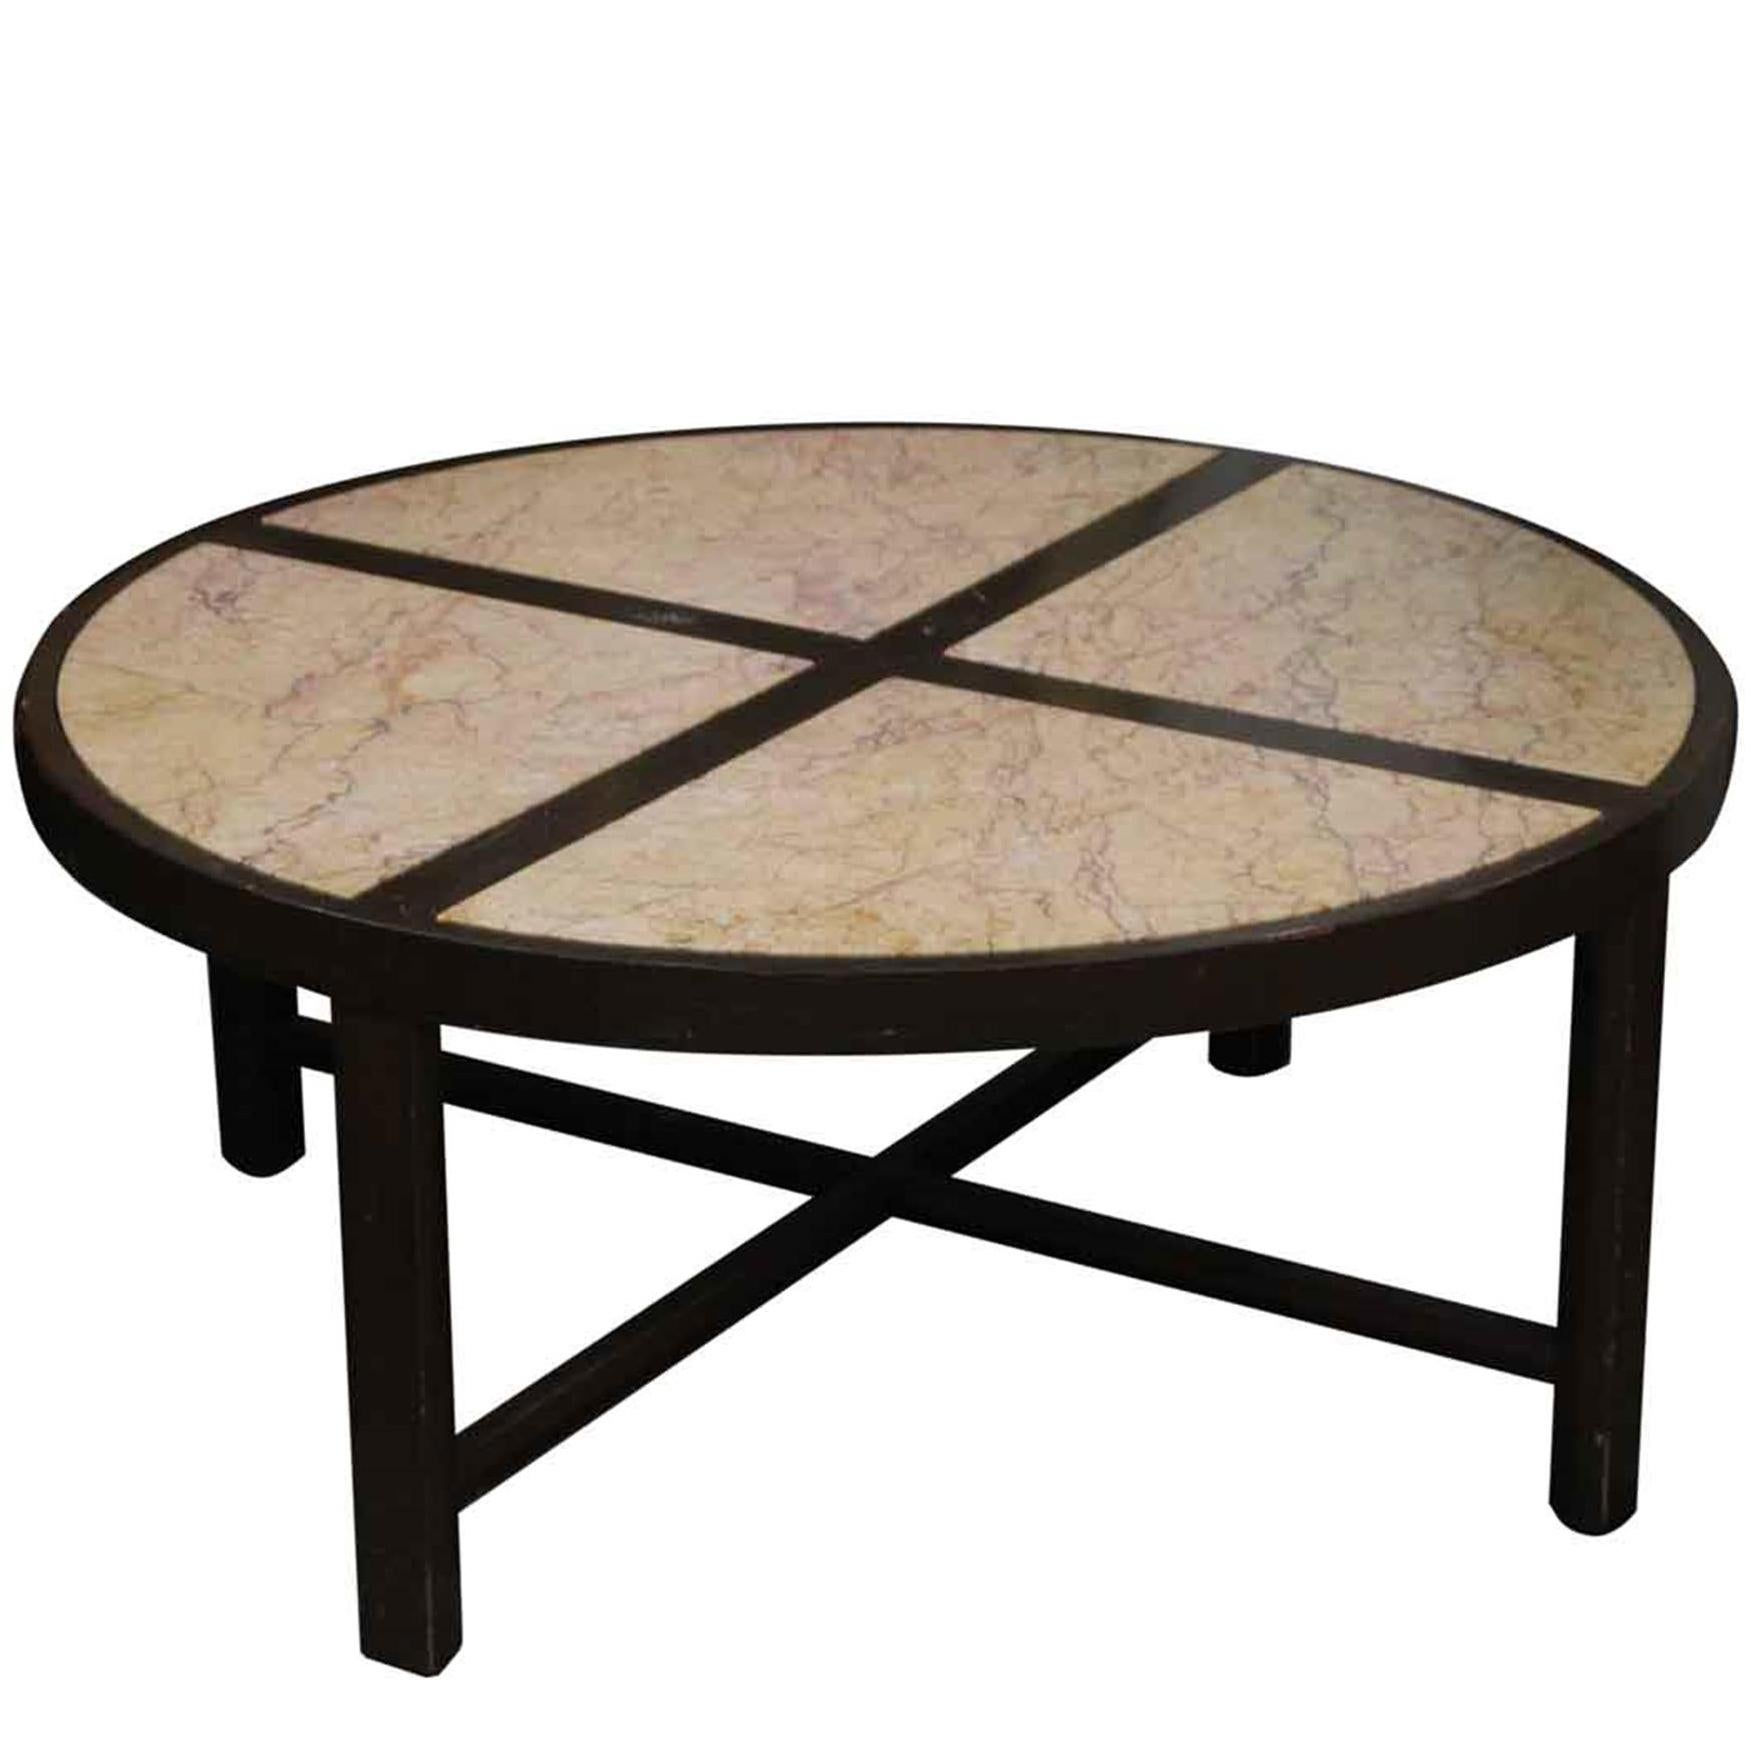 1950s Mid-Century Modern Four Section Marble Top and Dark Tone Wood Coffee Table